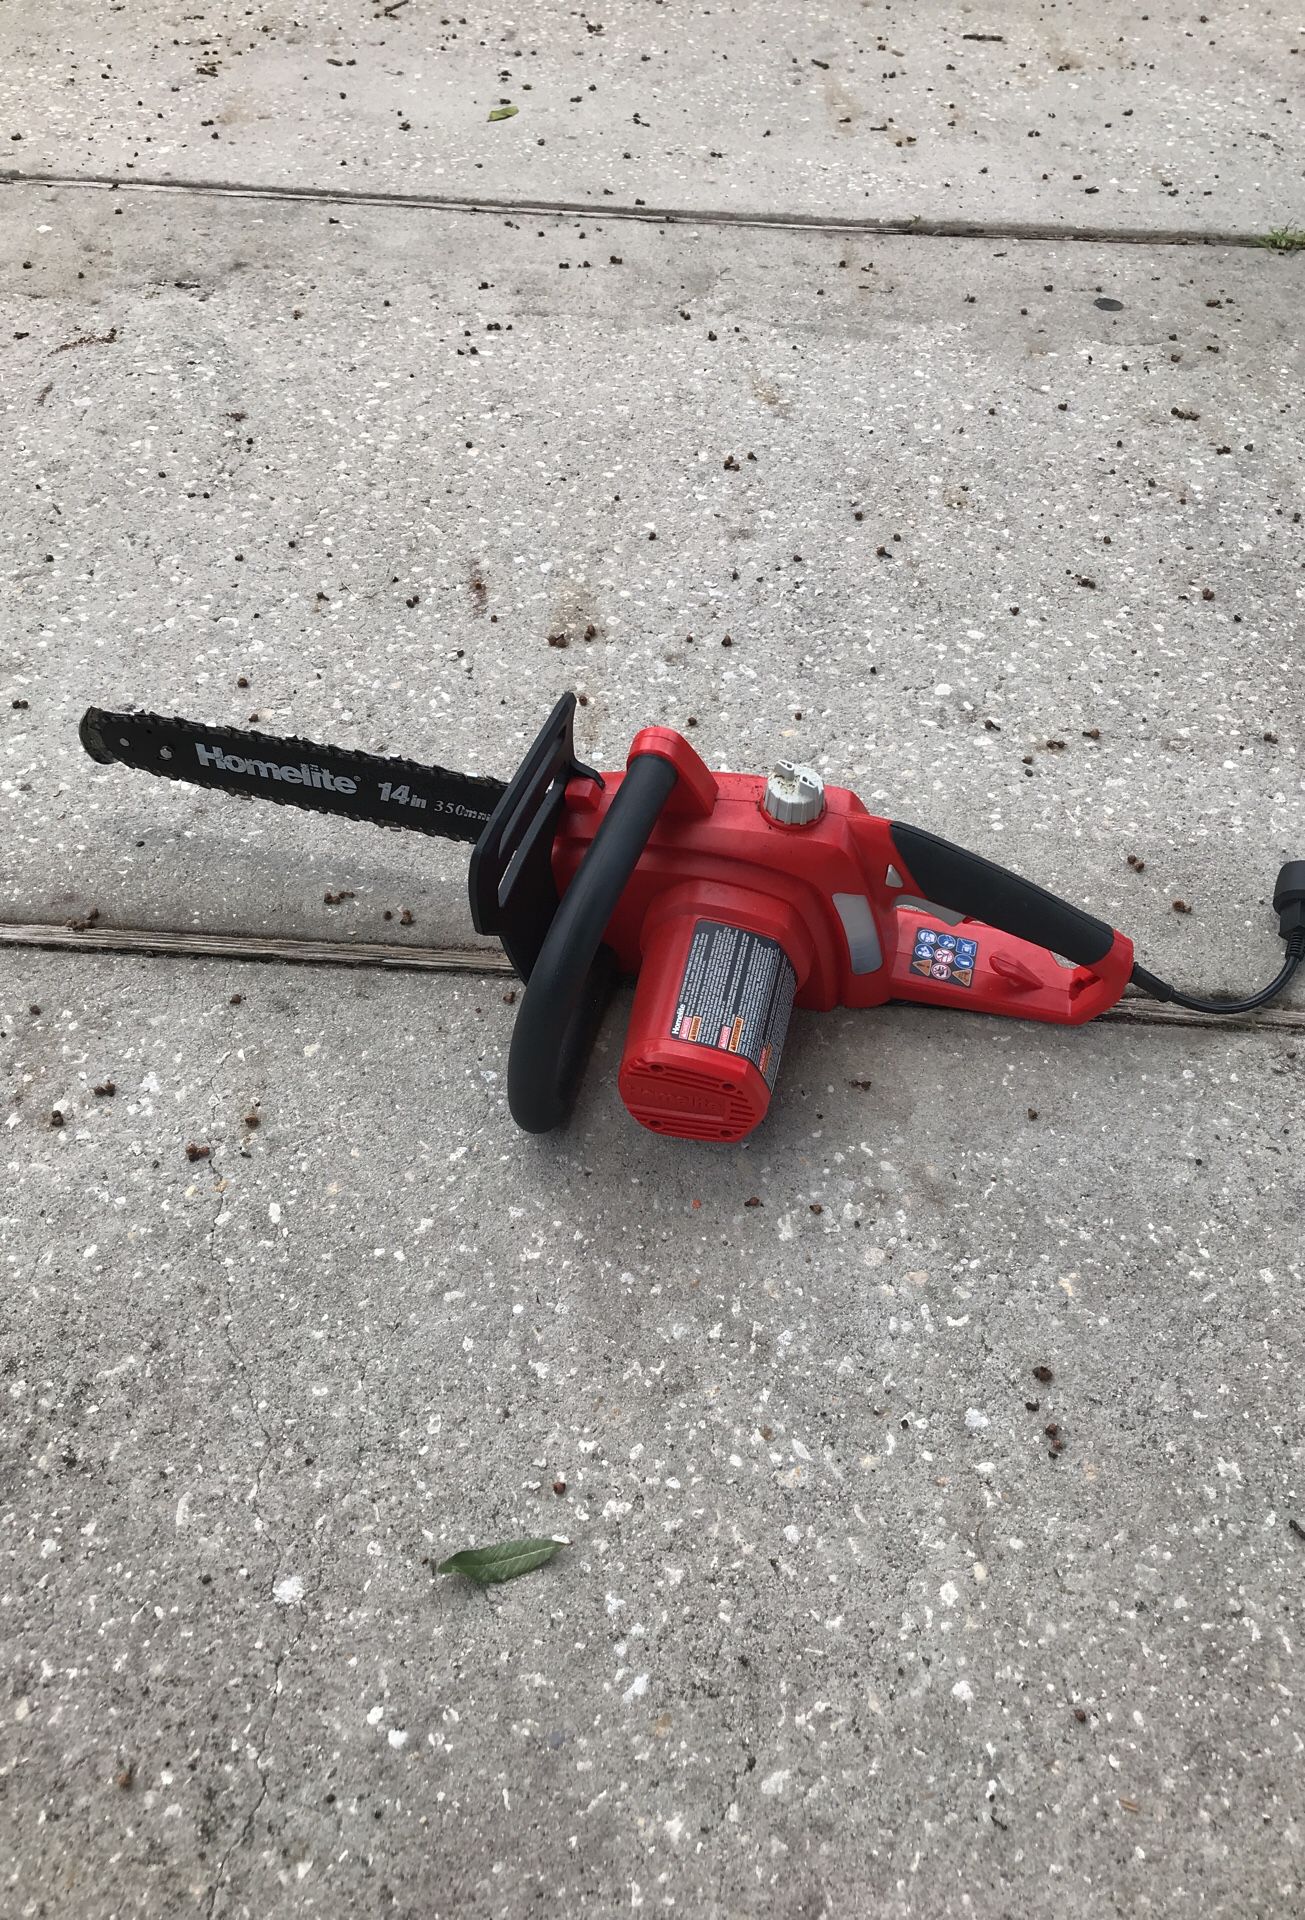 Homelite 14” electric chainsaw